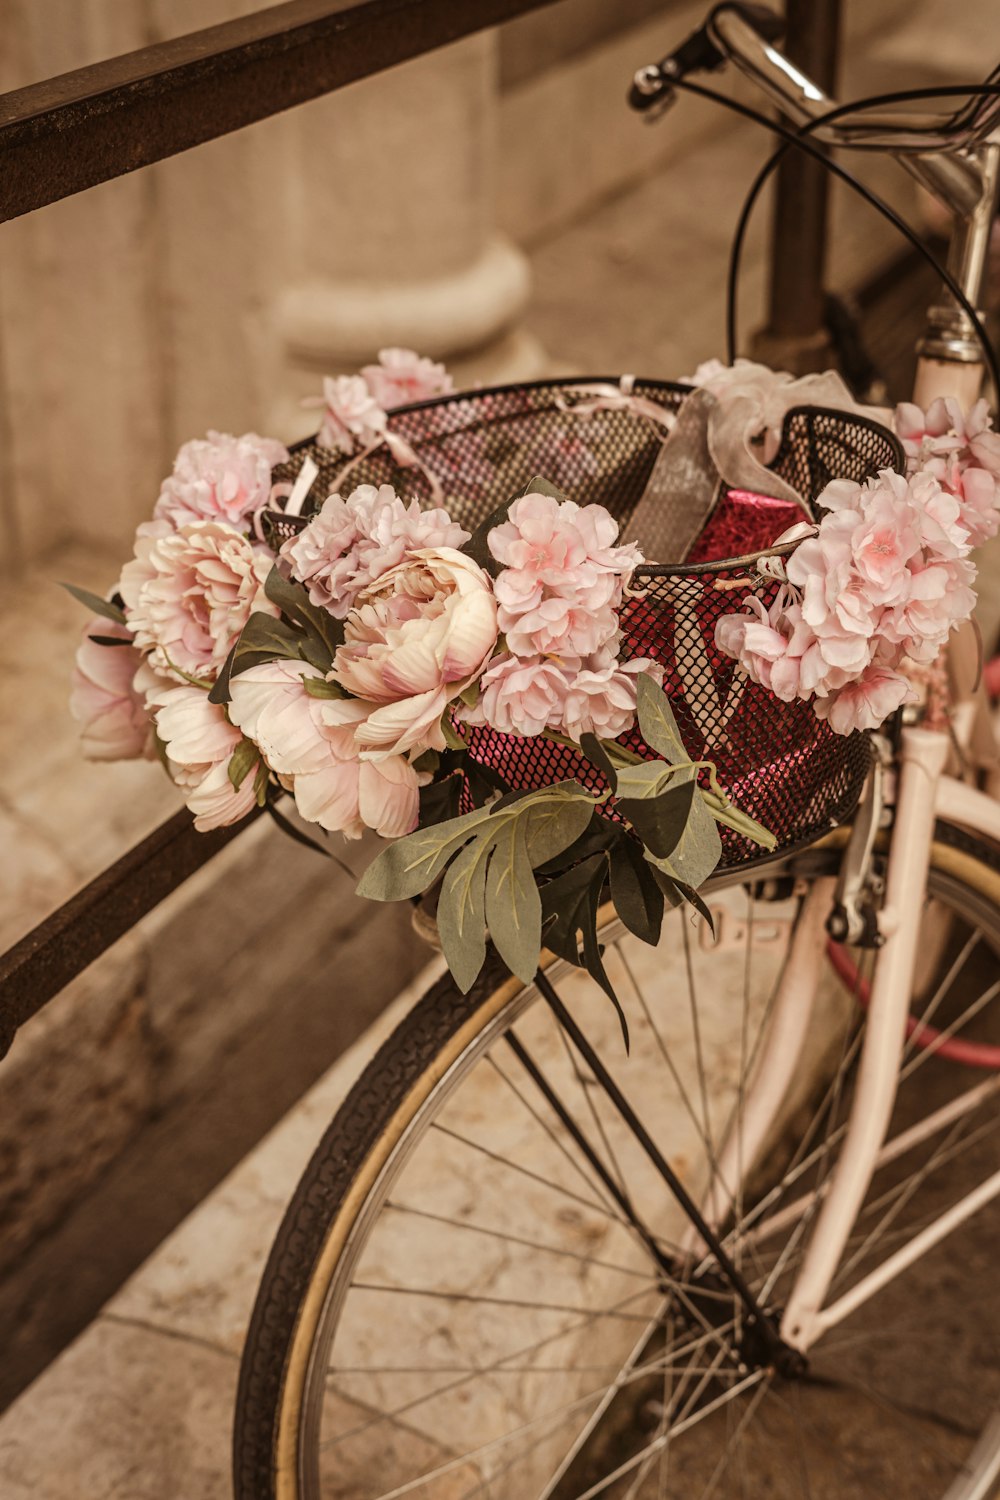 a close up of a bicycle with flowers on it